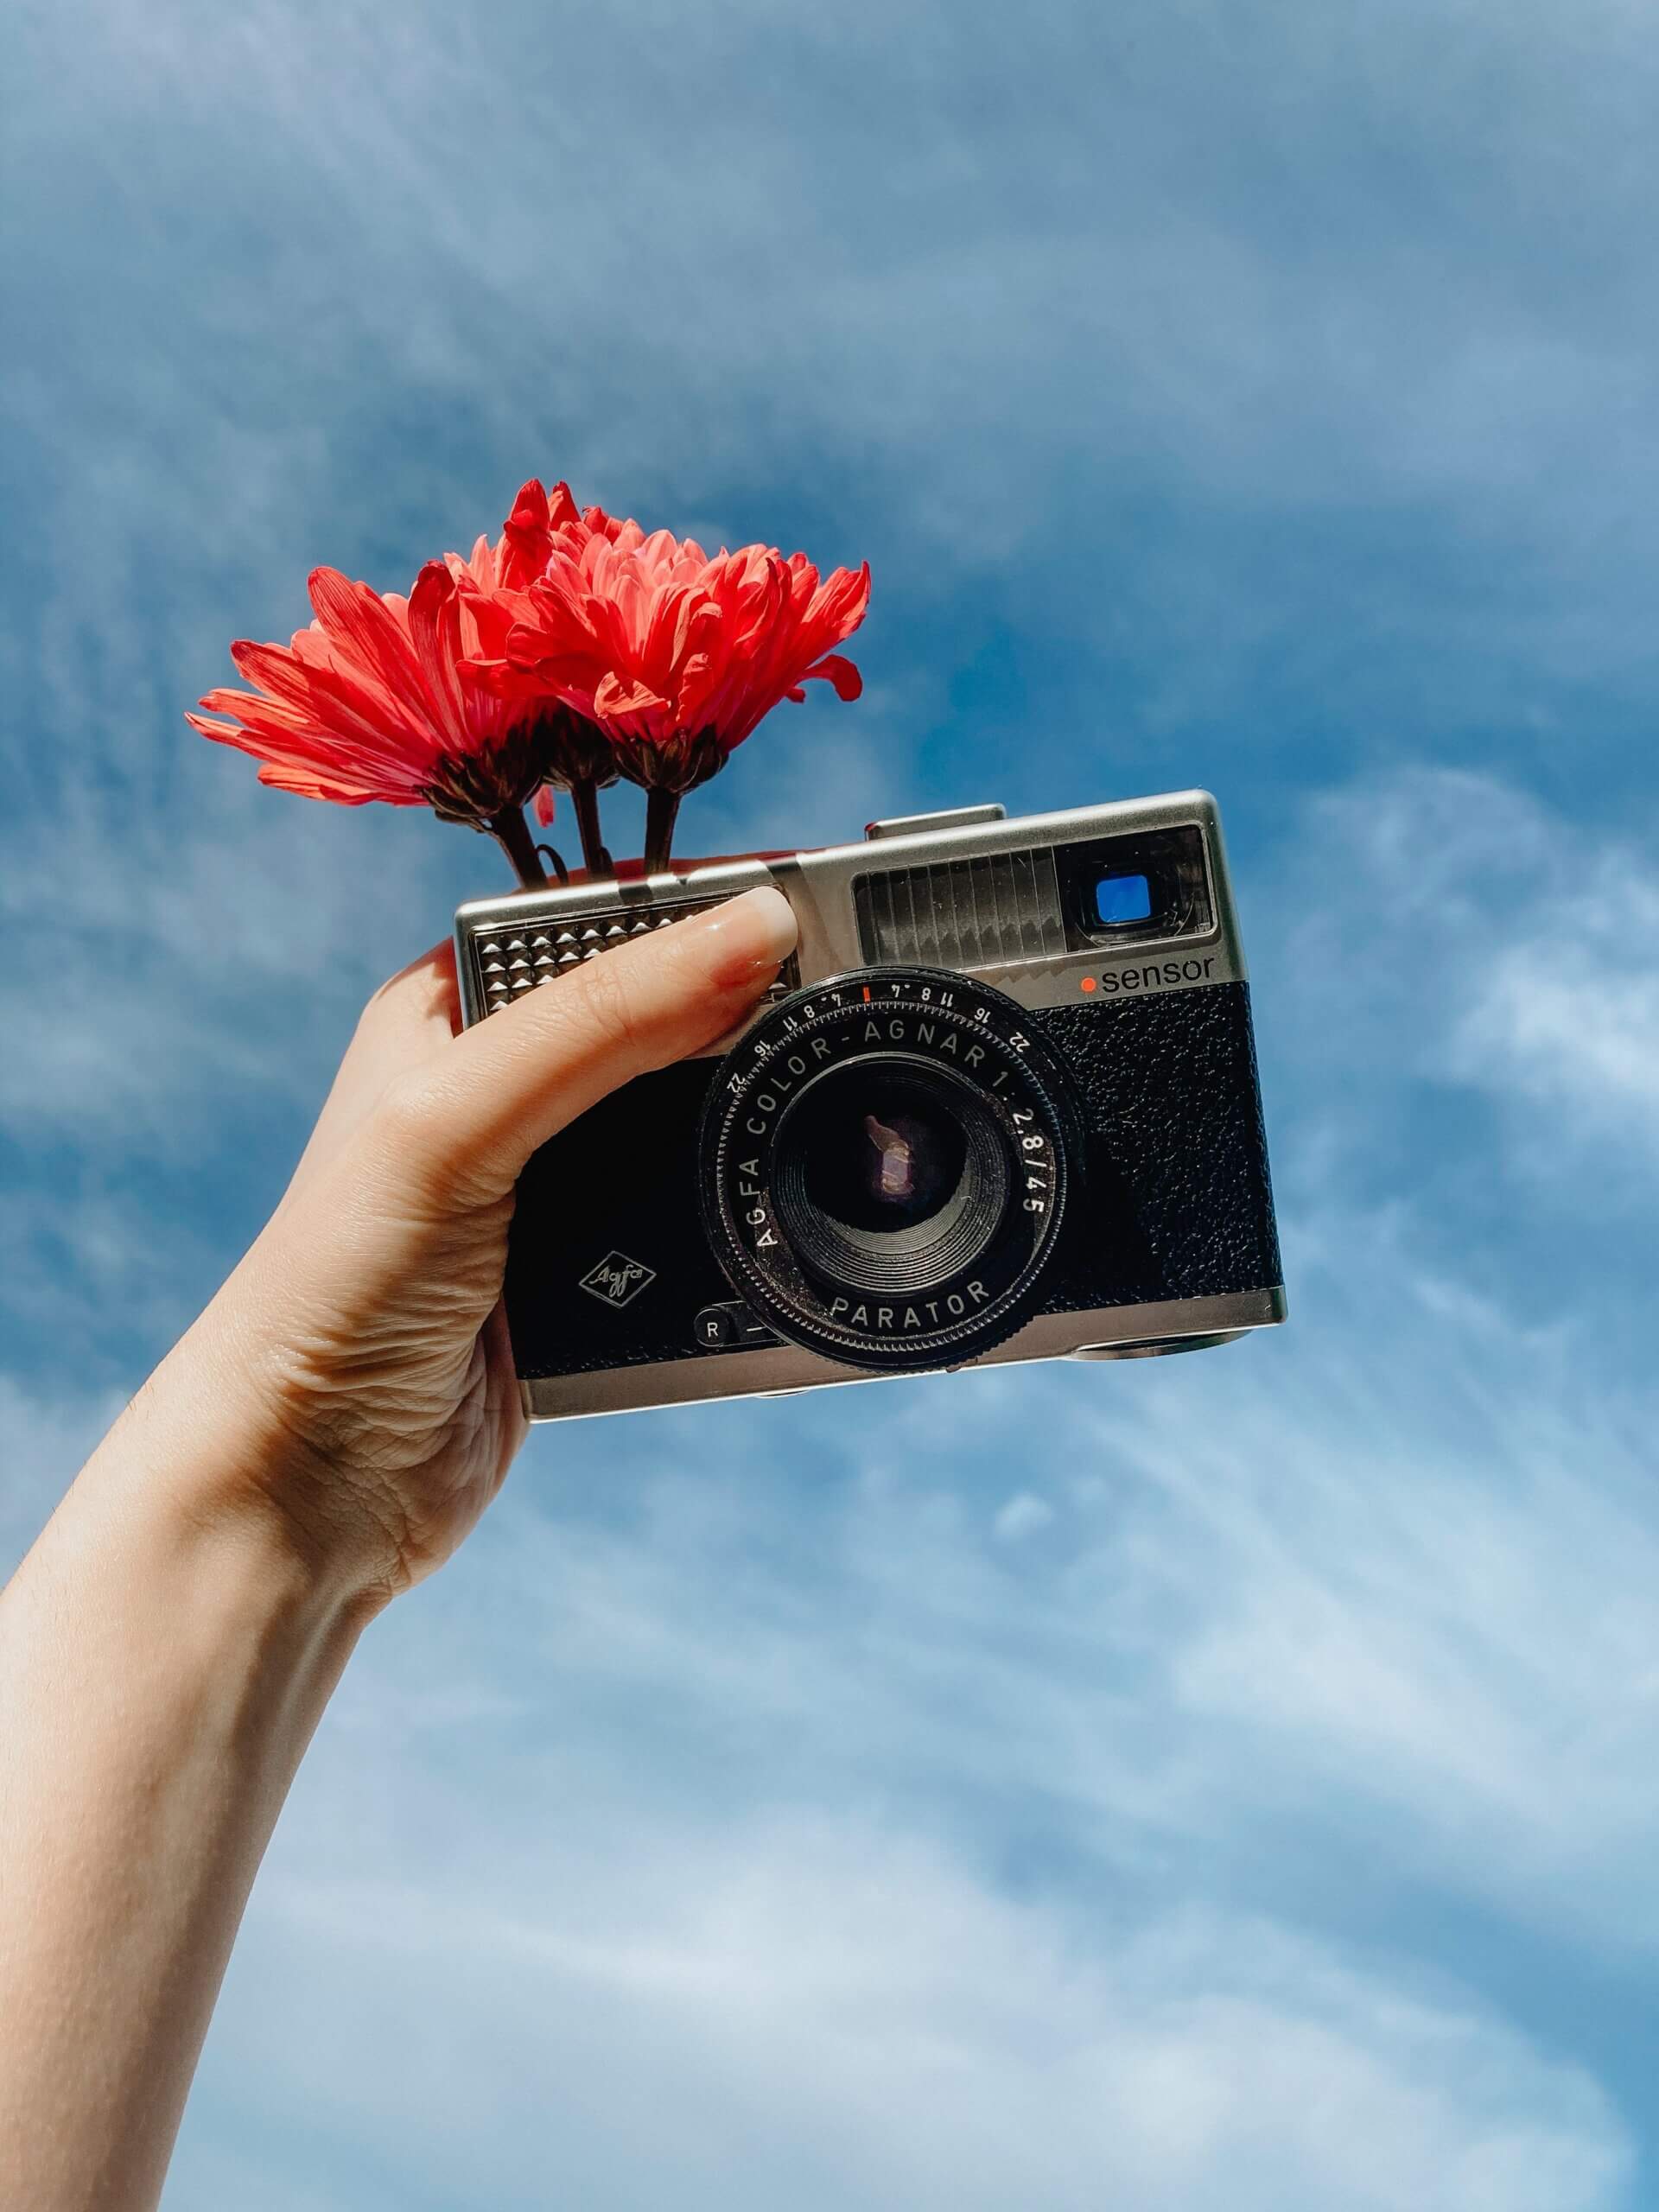 Photograph of hand with camera and flowers